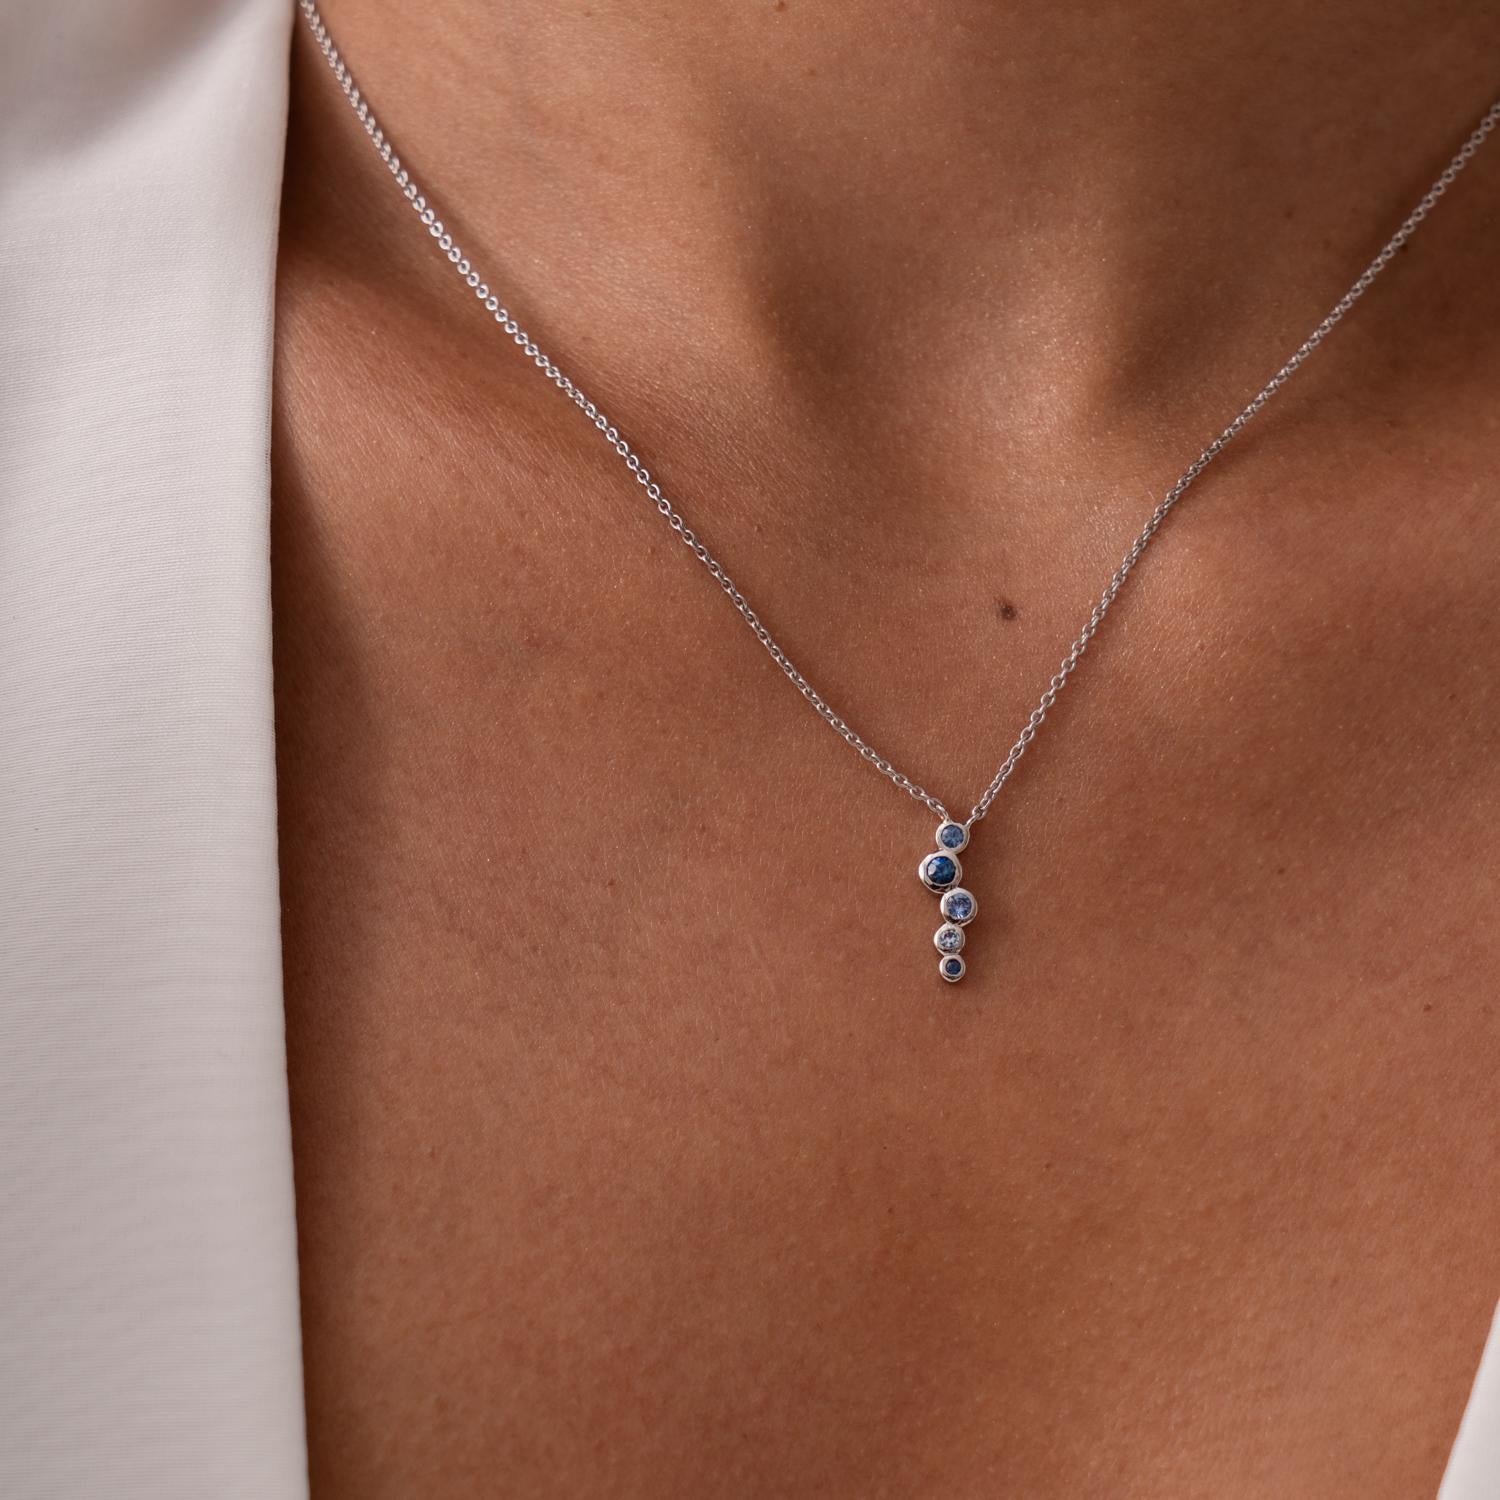 Luxuriously handcrafted in 18ct white gold, this elegant Cascade pendant features a delicate waterfall of 5 blue sapphires and aquamarines. The colourful gemstones are encased in rub-over settings in an ombre combination and suspended from fine 18ct